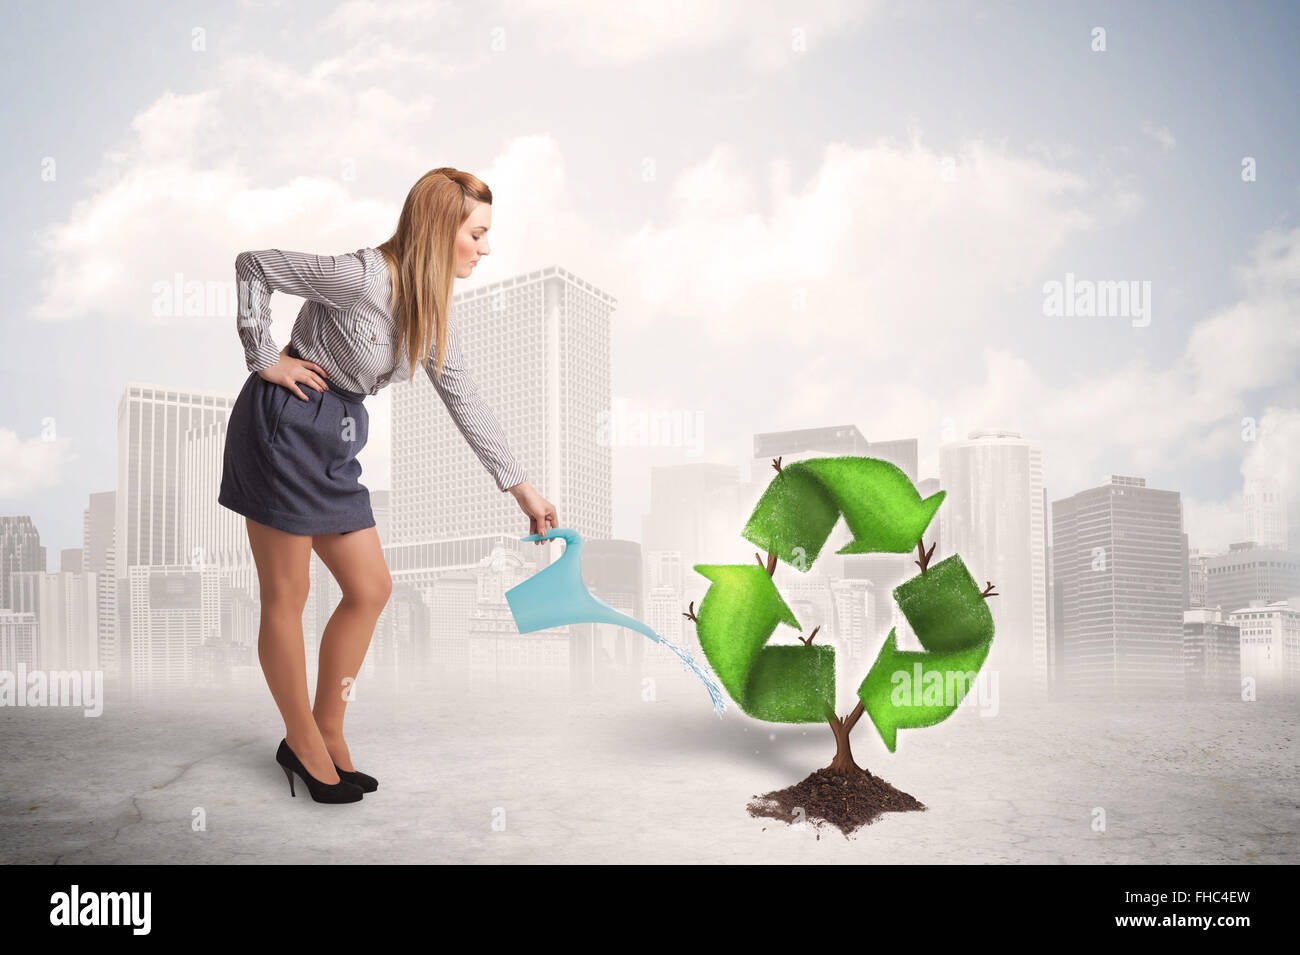 Business woman watering green recycle sign tree on city background Stock Photo